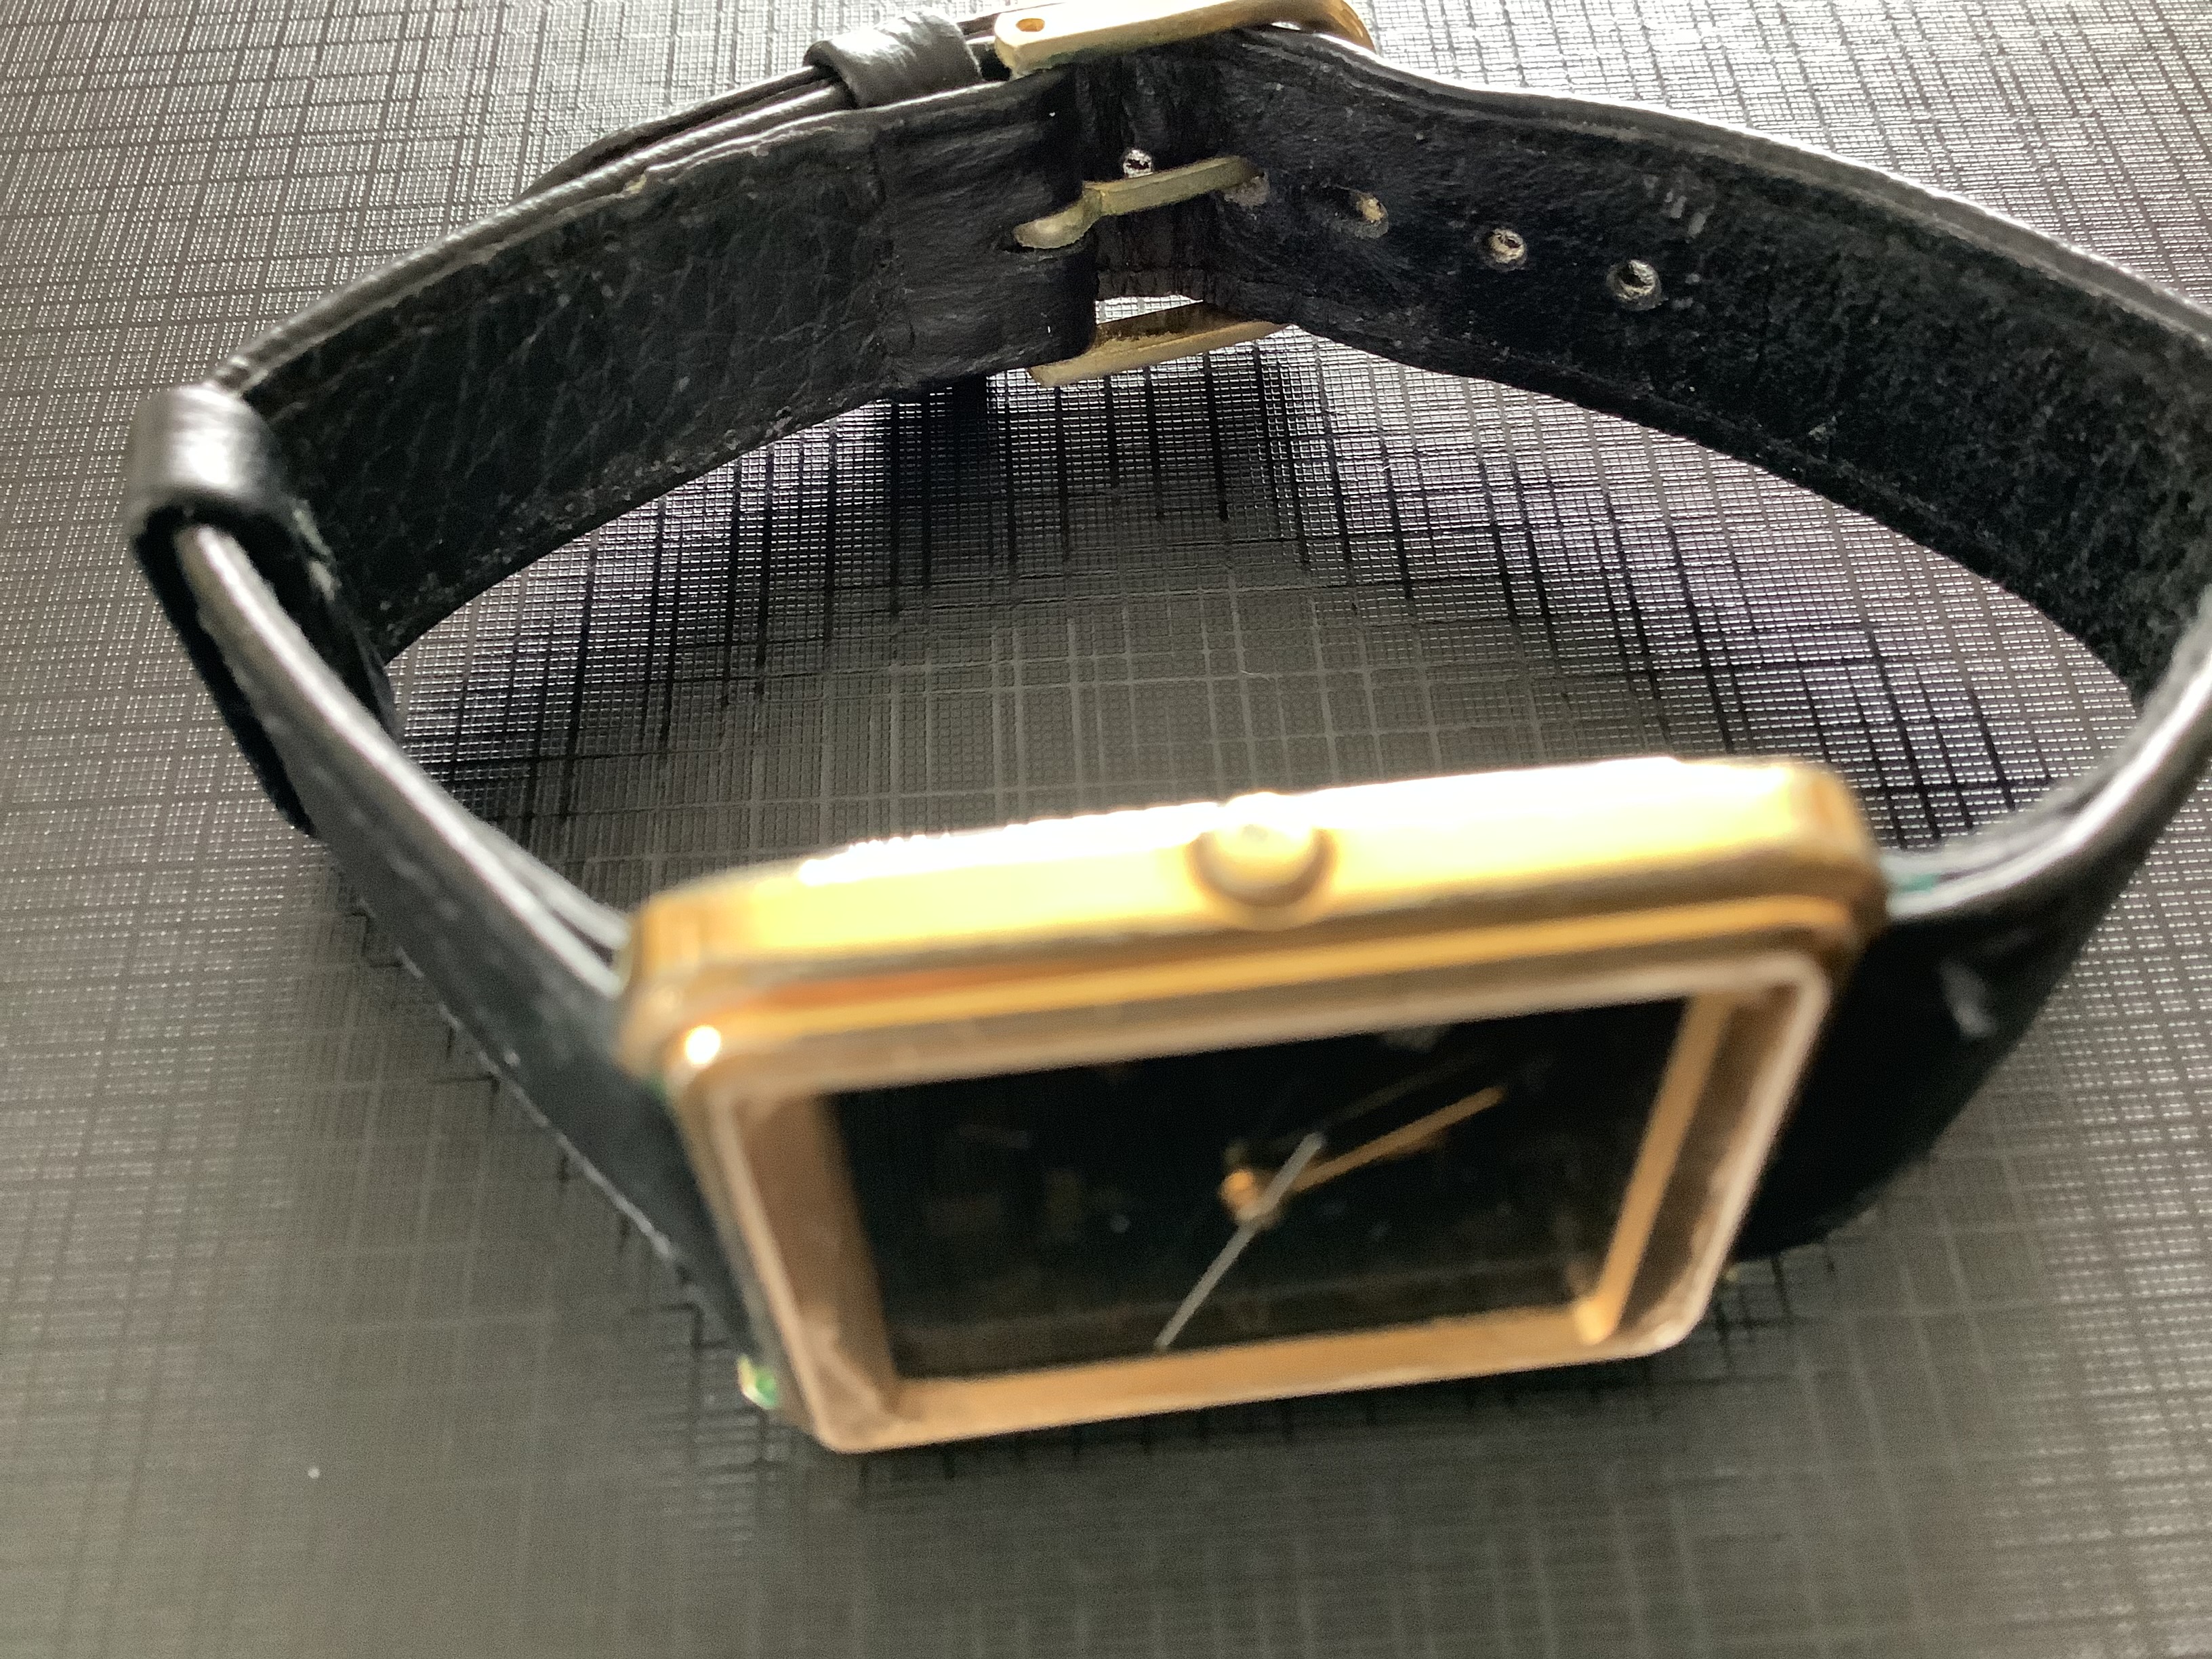 Gorgeous 1990 Pulsar Gold Plated Wristwatch (GS 142)